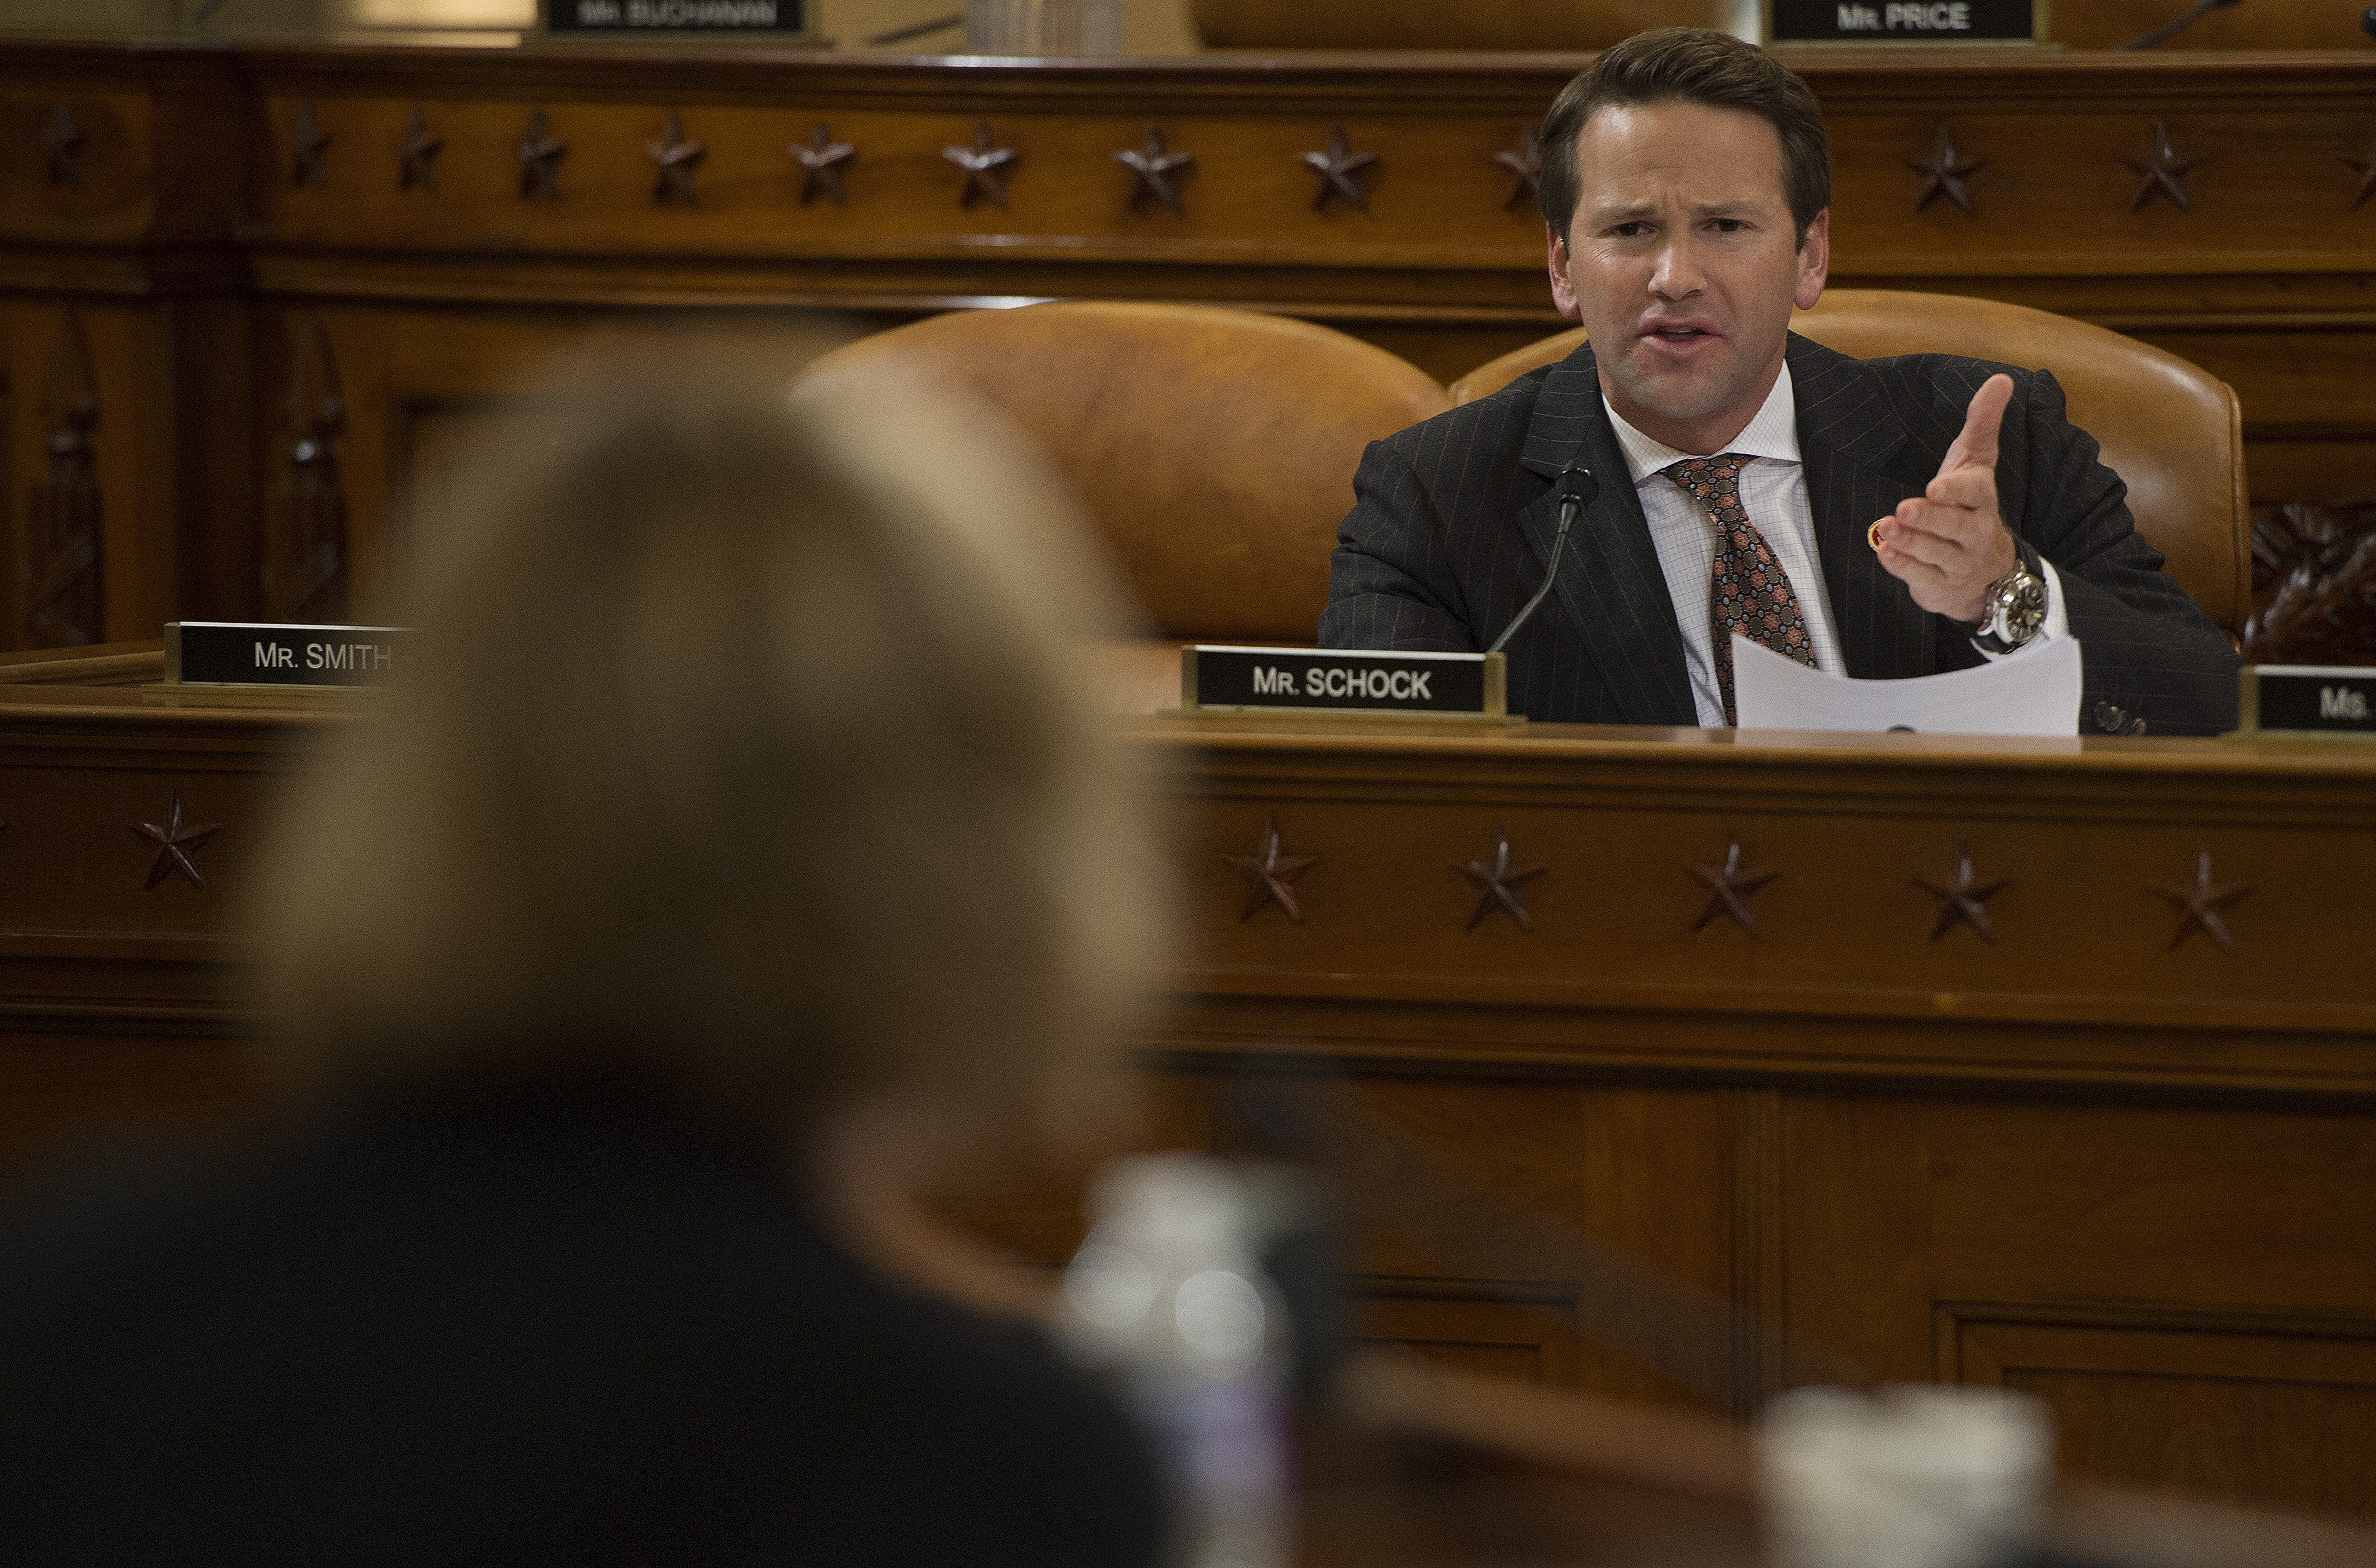 Congressman Aaron Schock questions Marilyn Tavenner, Administrator for Centers for Medicare & Medicaid Services, US Department of Health and Human Services as she testifies before the Ways and Means Committee in Washington, DC.